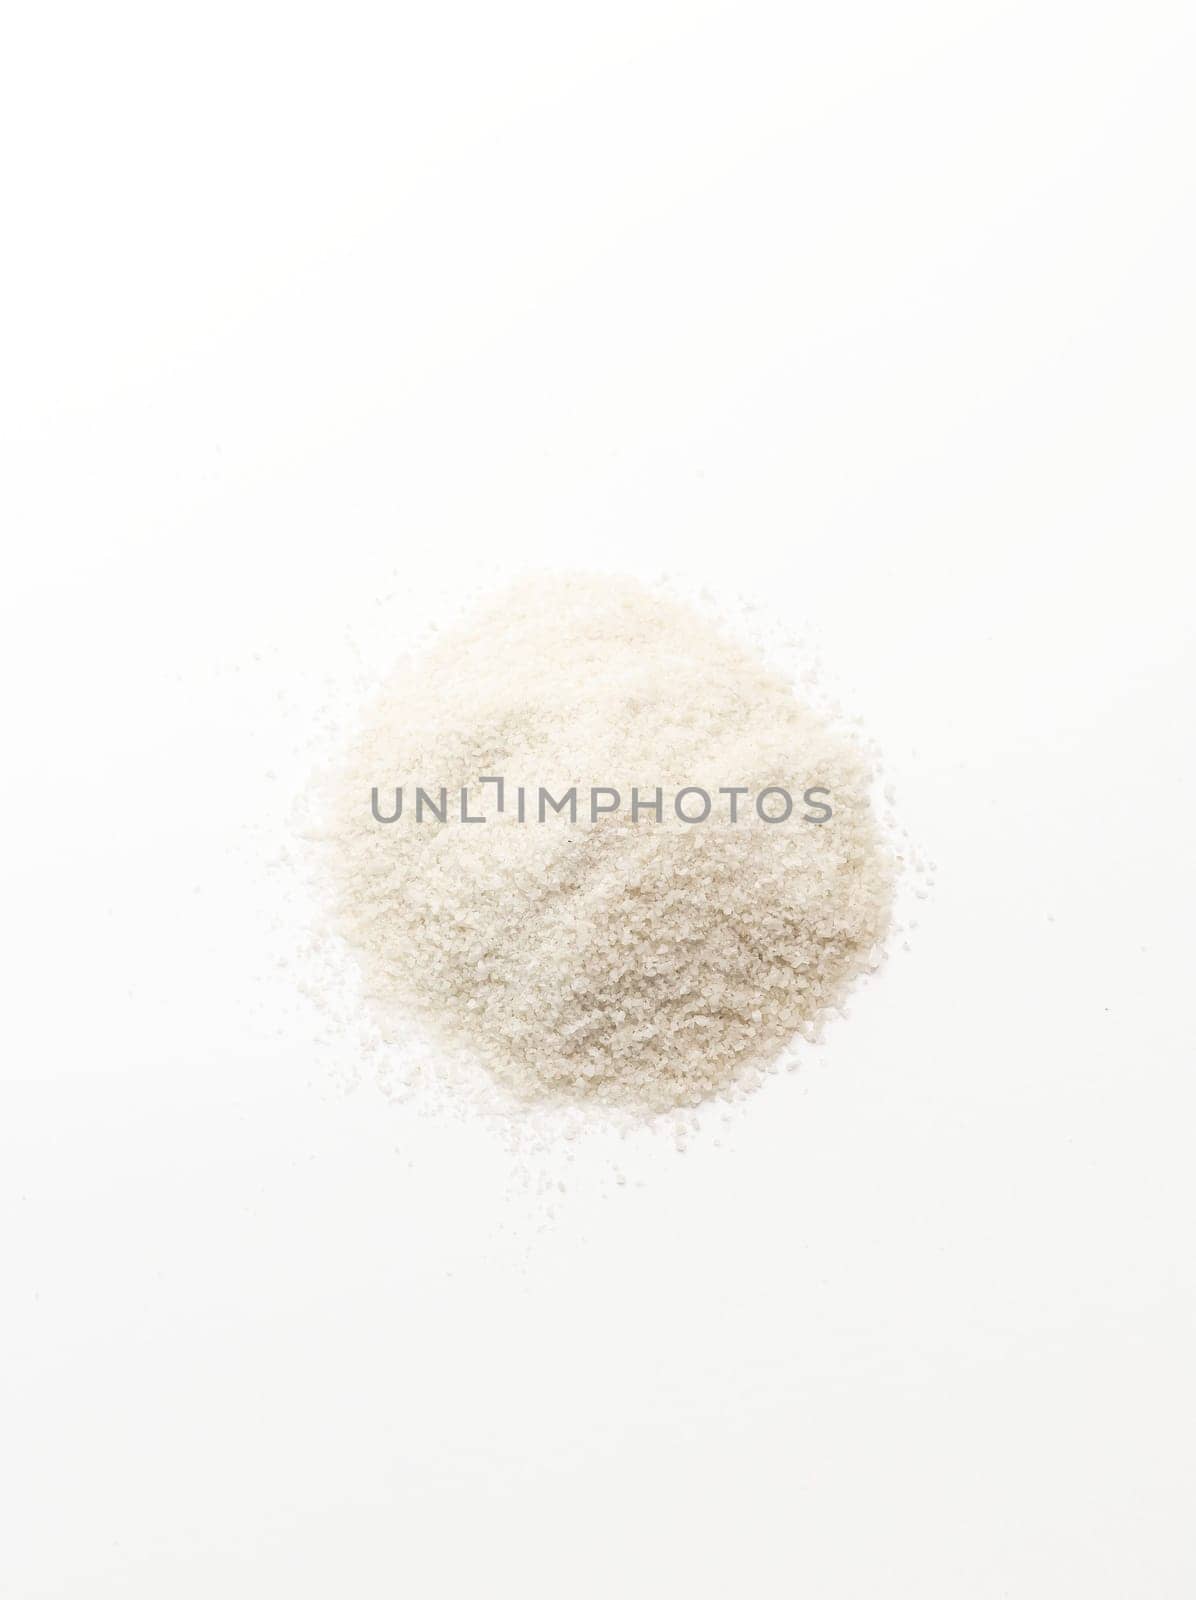 Isolated Celtic Gray Sea Salt On White Background, Vertical Plane. Top View. Natural And Unrefined Salt Harvested From Brittany, France. Superfood, Dieting. Natural Minerals And Trace Elements by netatsi